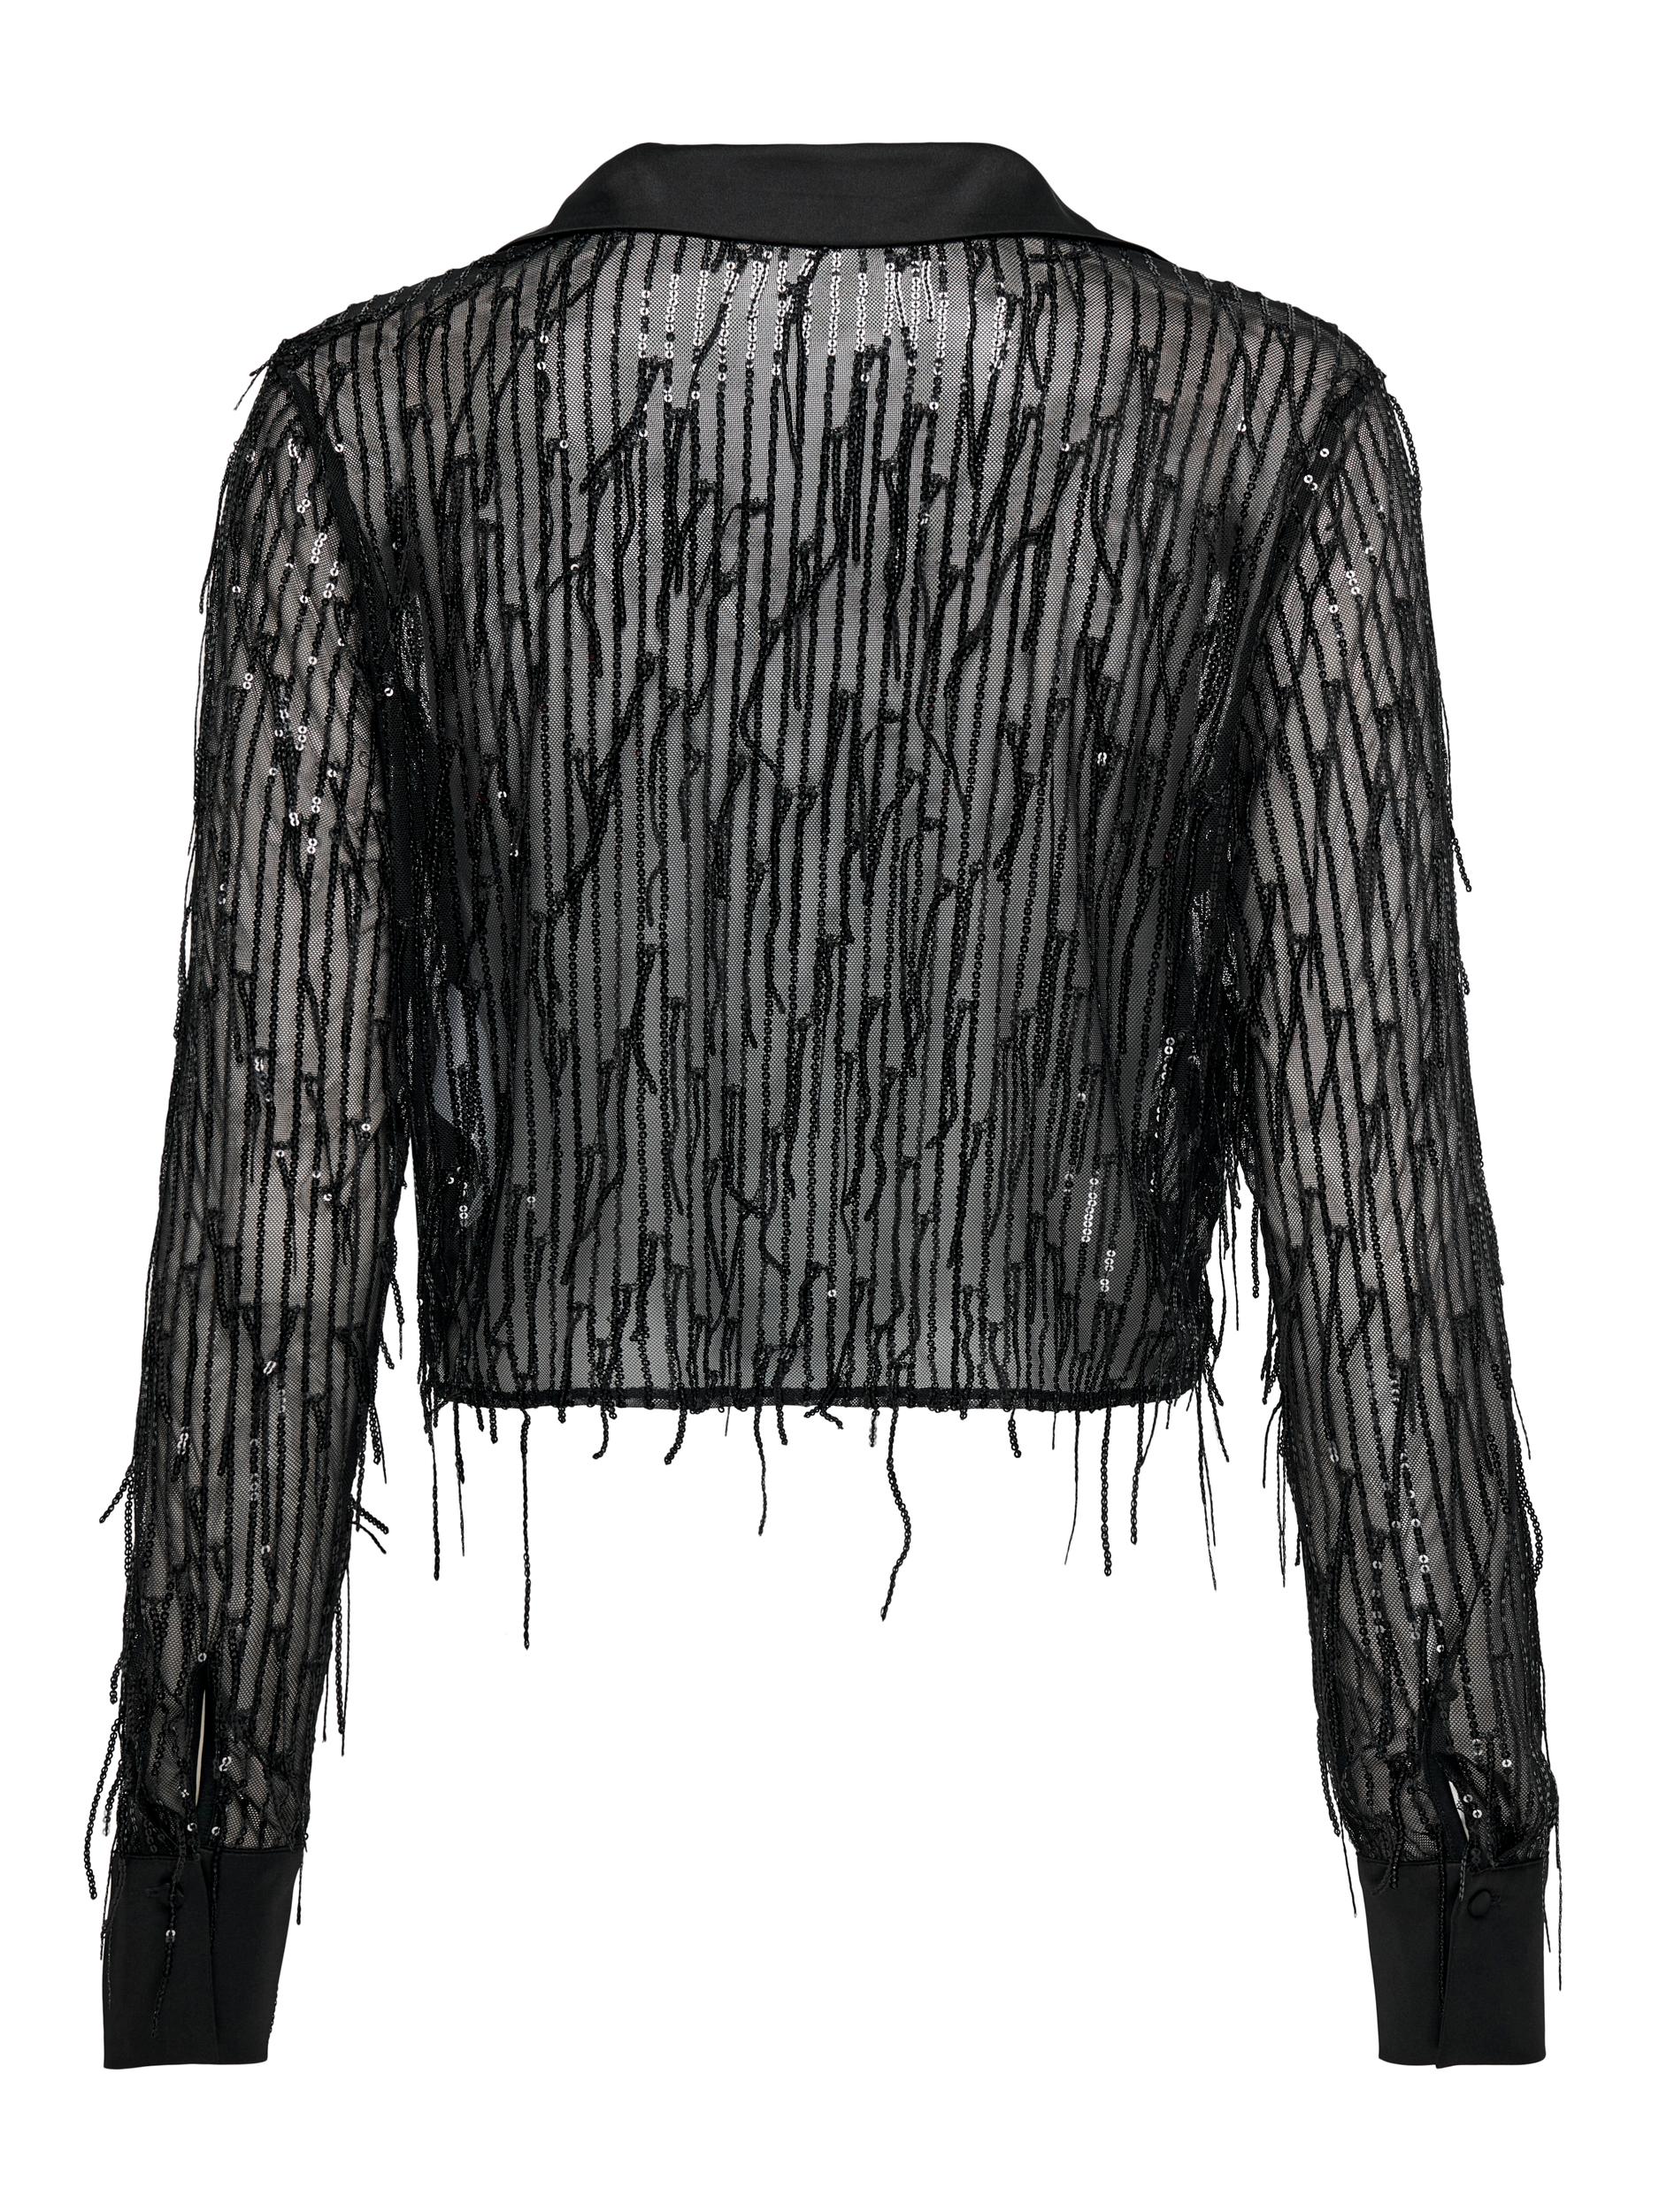 Spacy Long Sleeve Woven Black Top-Back view